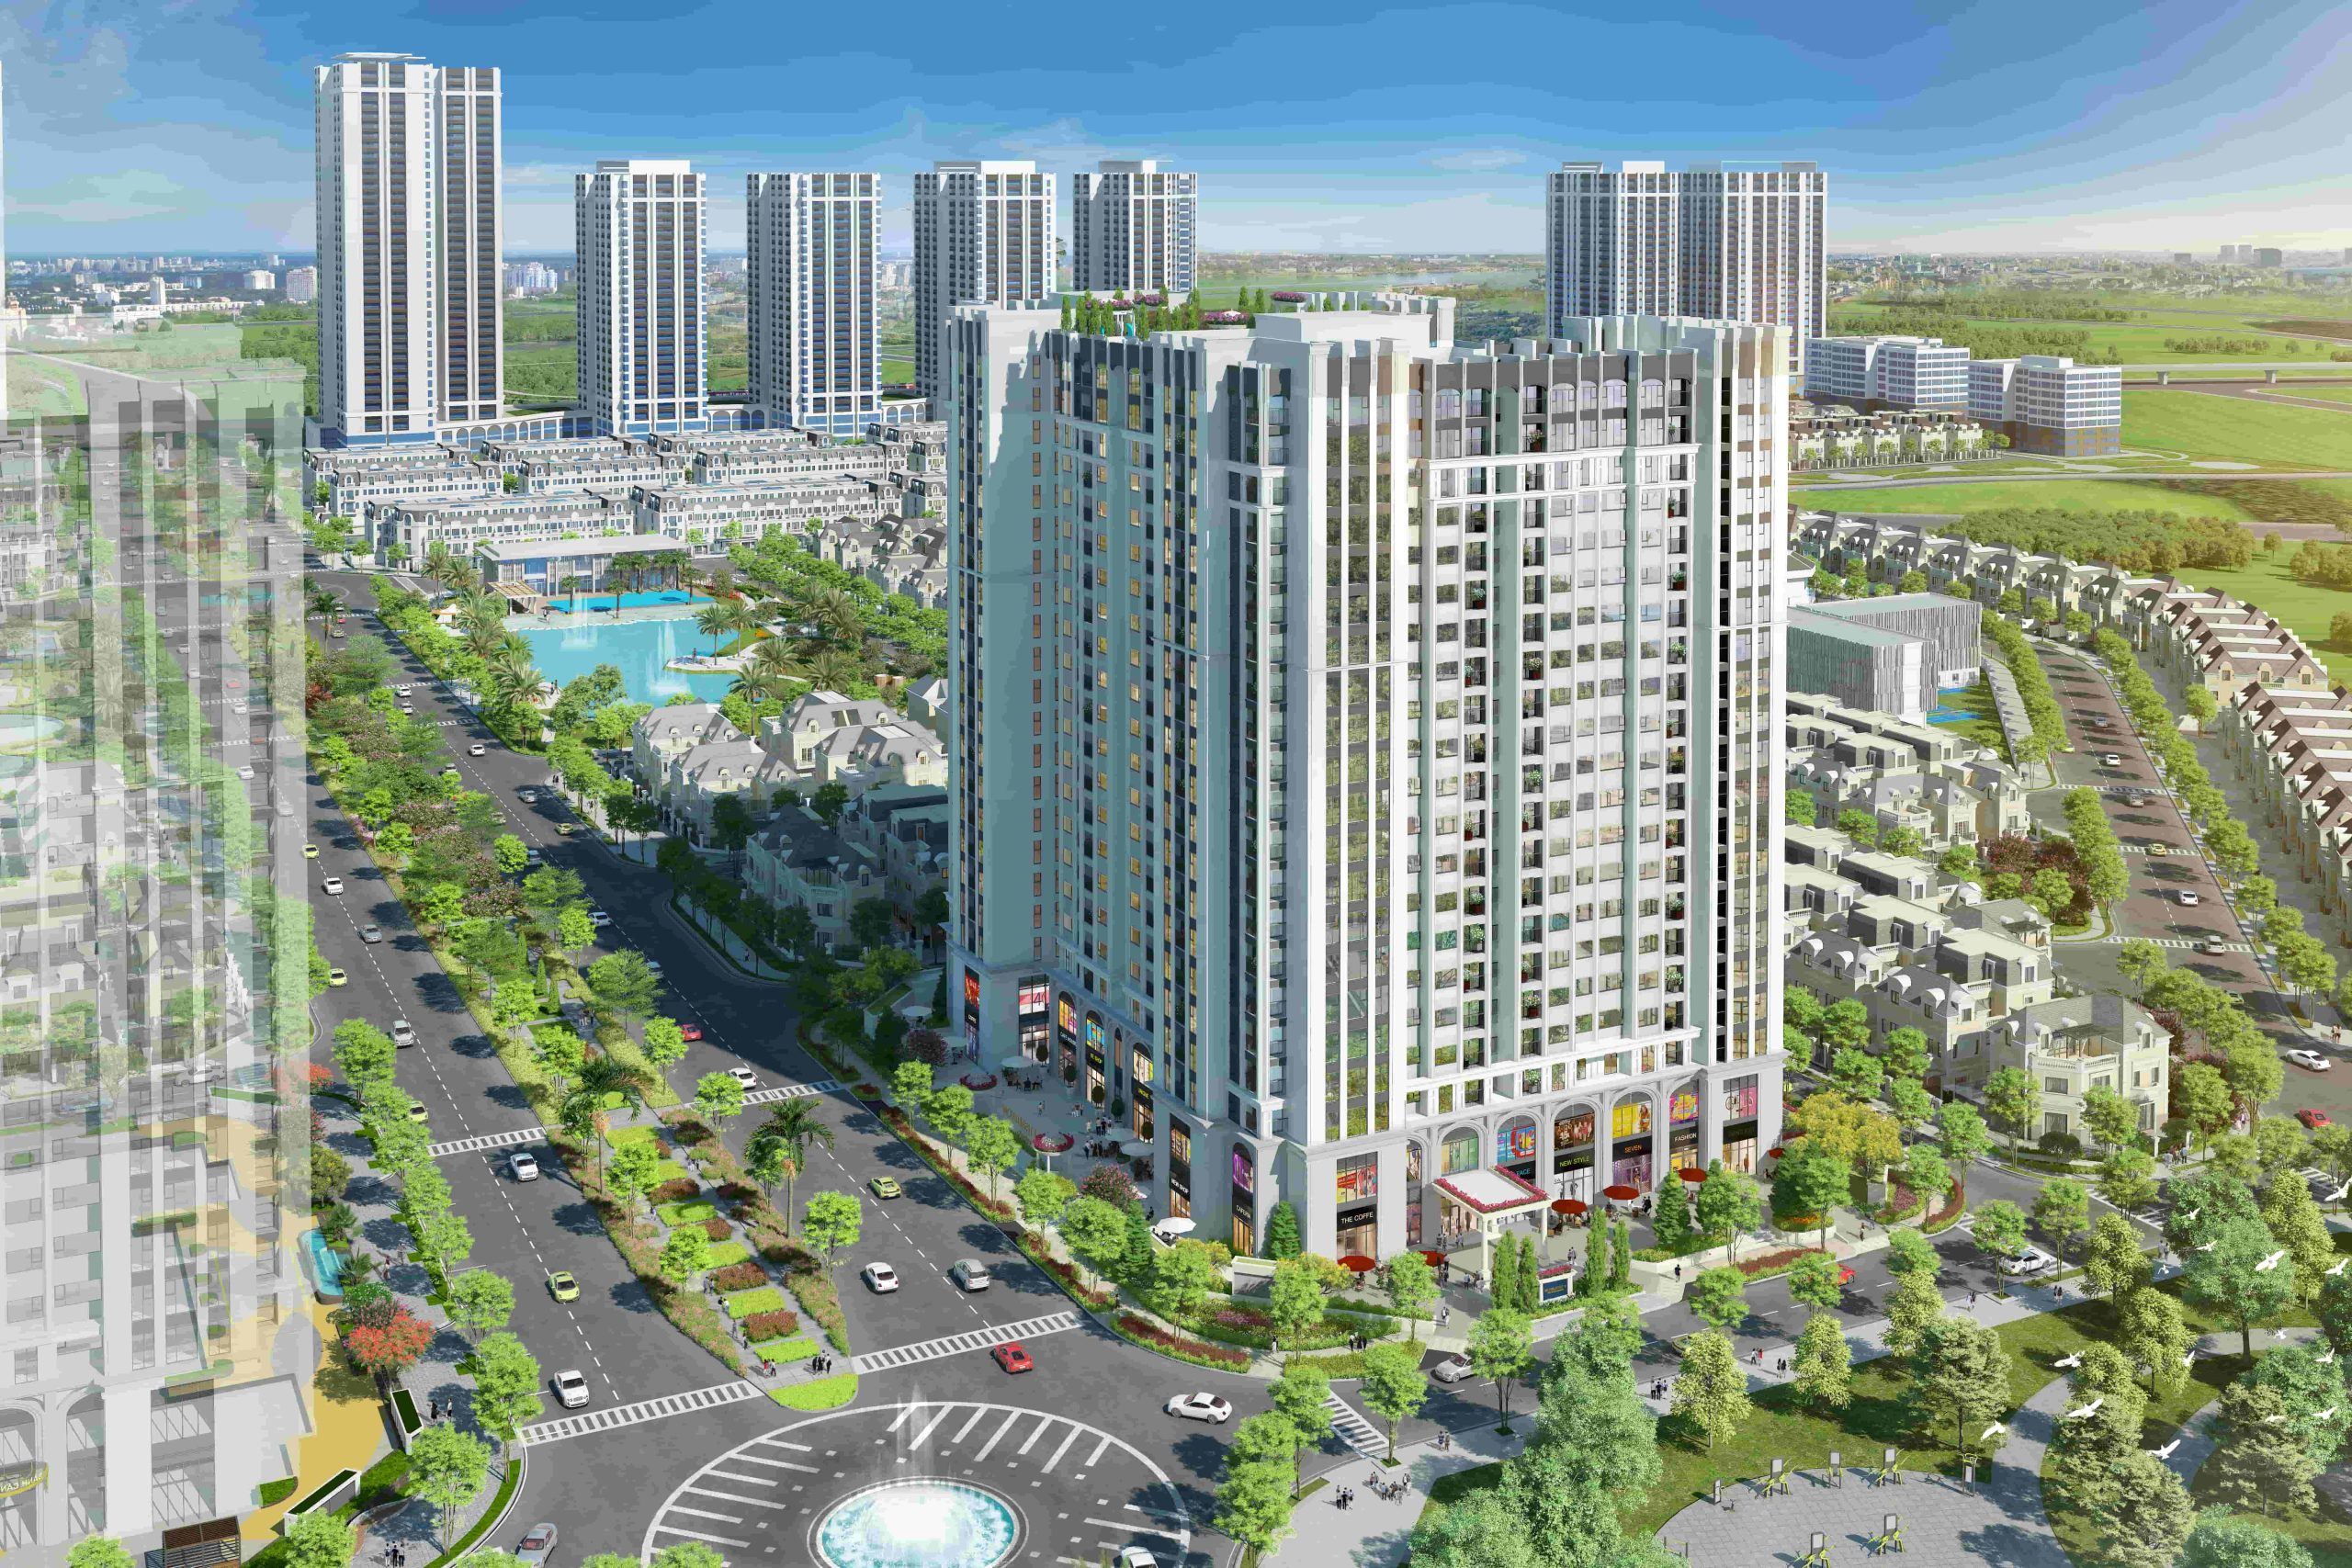 Anlac Group and Dat Xanh Mien Bac officially cooperate to sell the luxurious block of flats Moonlight 1